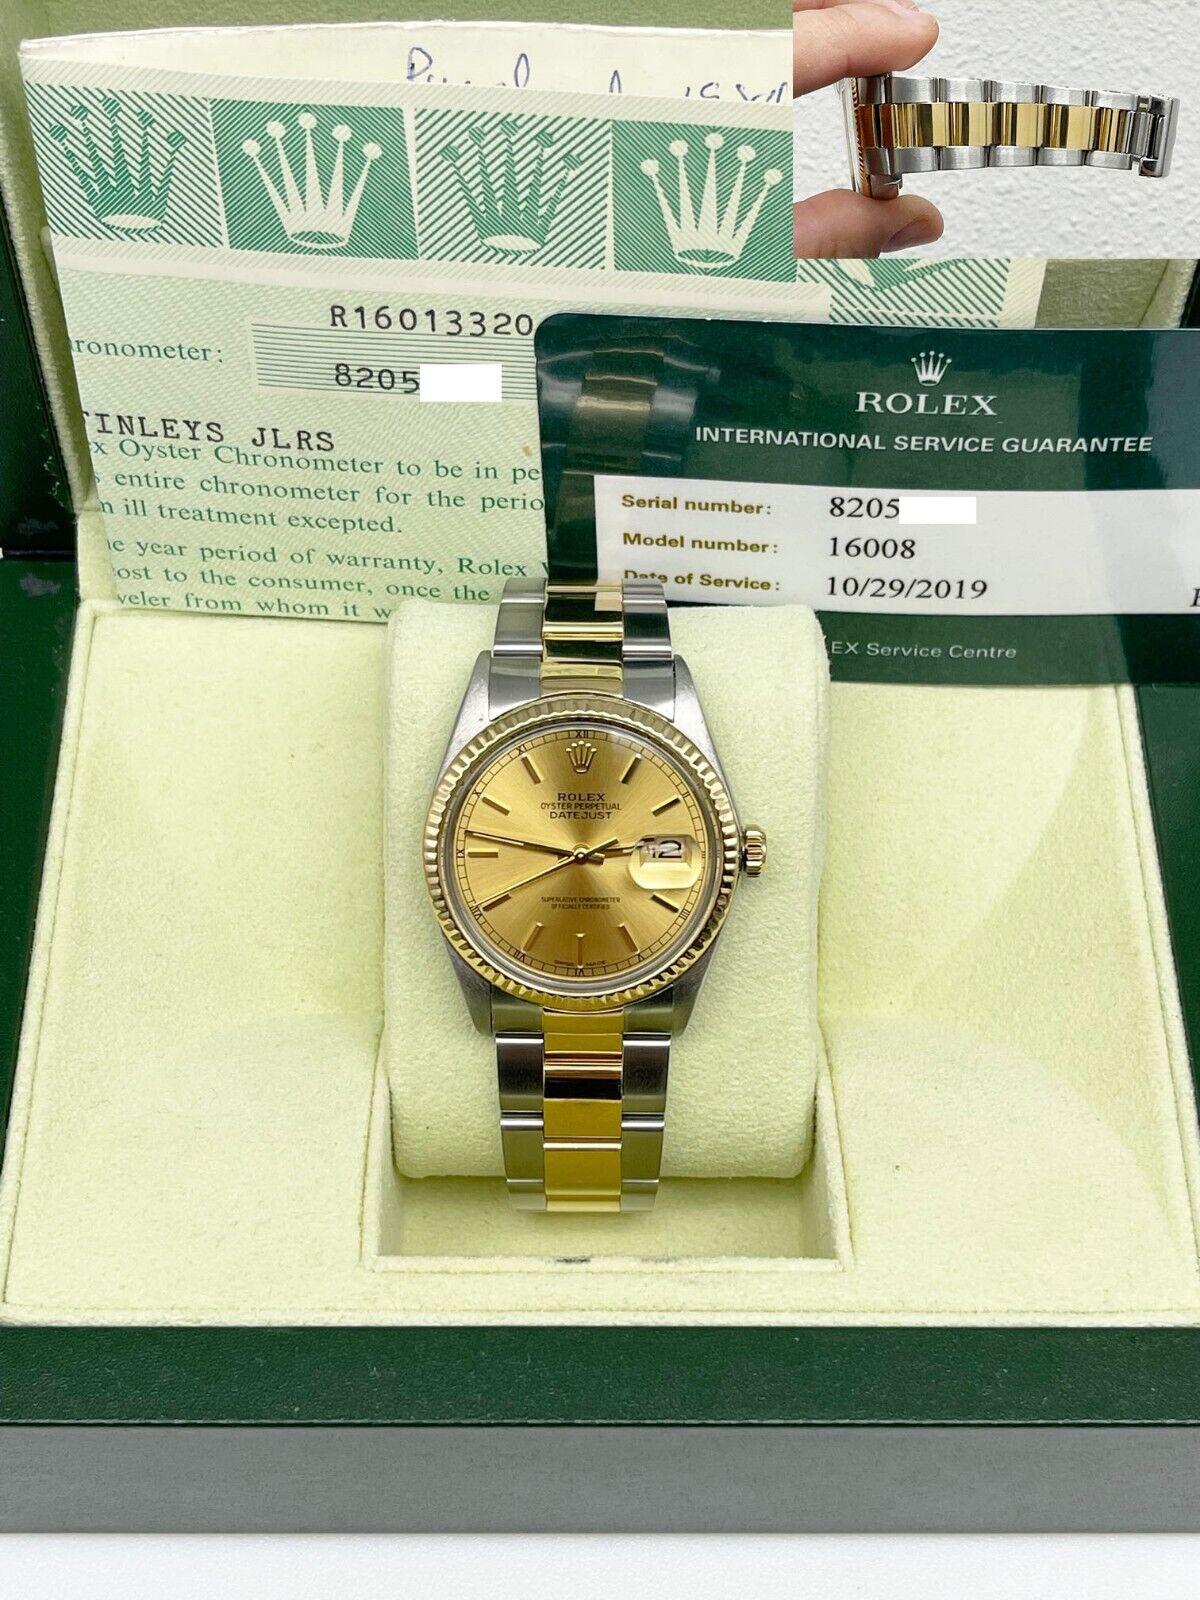 Style Number: 16013

 

Serial: 8205***



Model: Datejust

 

Case Material: Stainless Steel

 

Band: 18K Yellow Gold and Stainless Steel

 

Bezel: 18K Yellow Gold

 

Dial: Champagne 

 

Face: Acrylic

 

Case Size: 36 mm

 

Includes: 

-